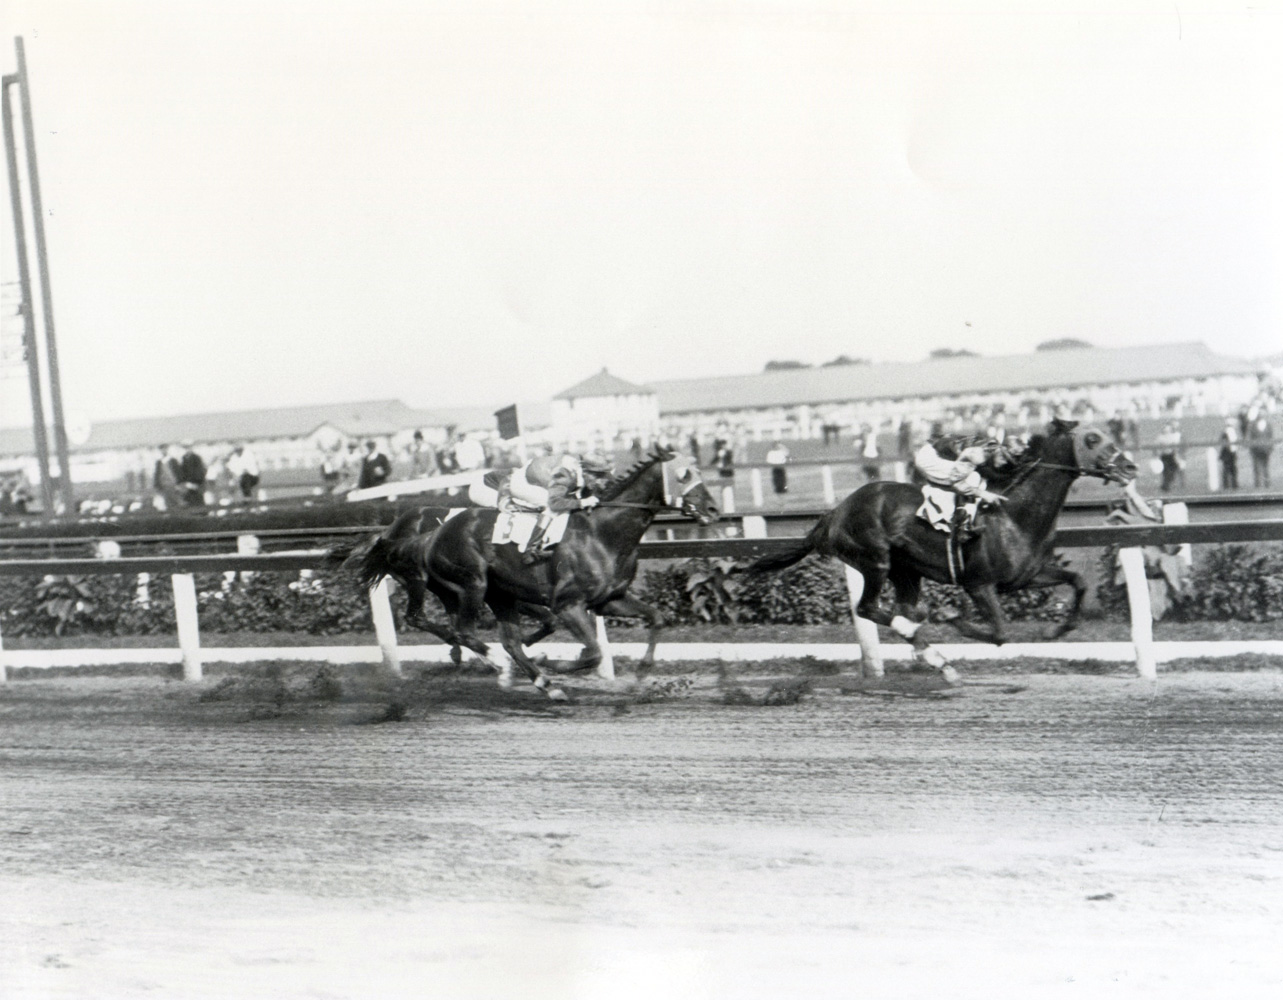 Frank Coltiletti and Sun Beau winning the 1929 Aqueduct Handicap at Aqueduct (Keeneland Library Cook Collection/Museum Collection)